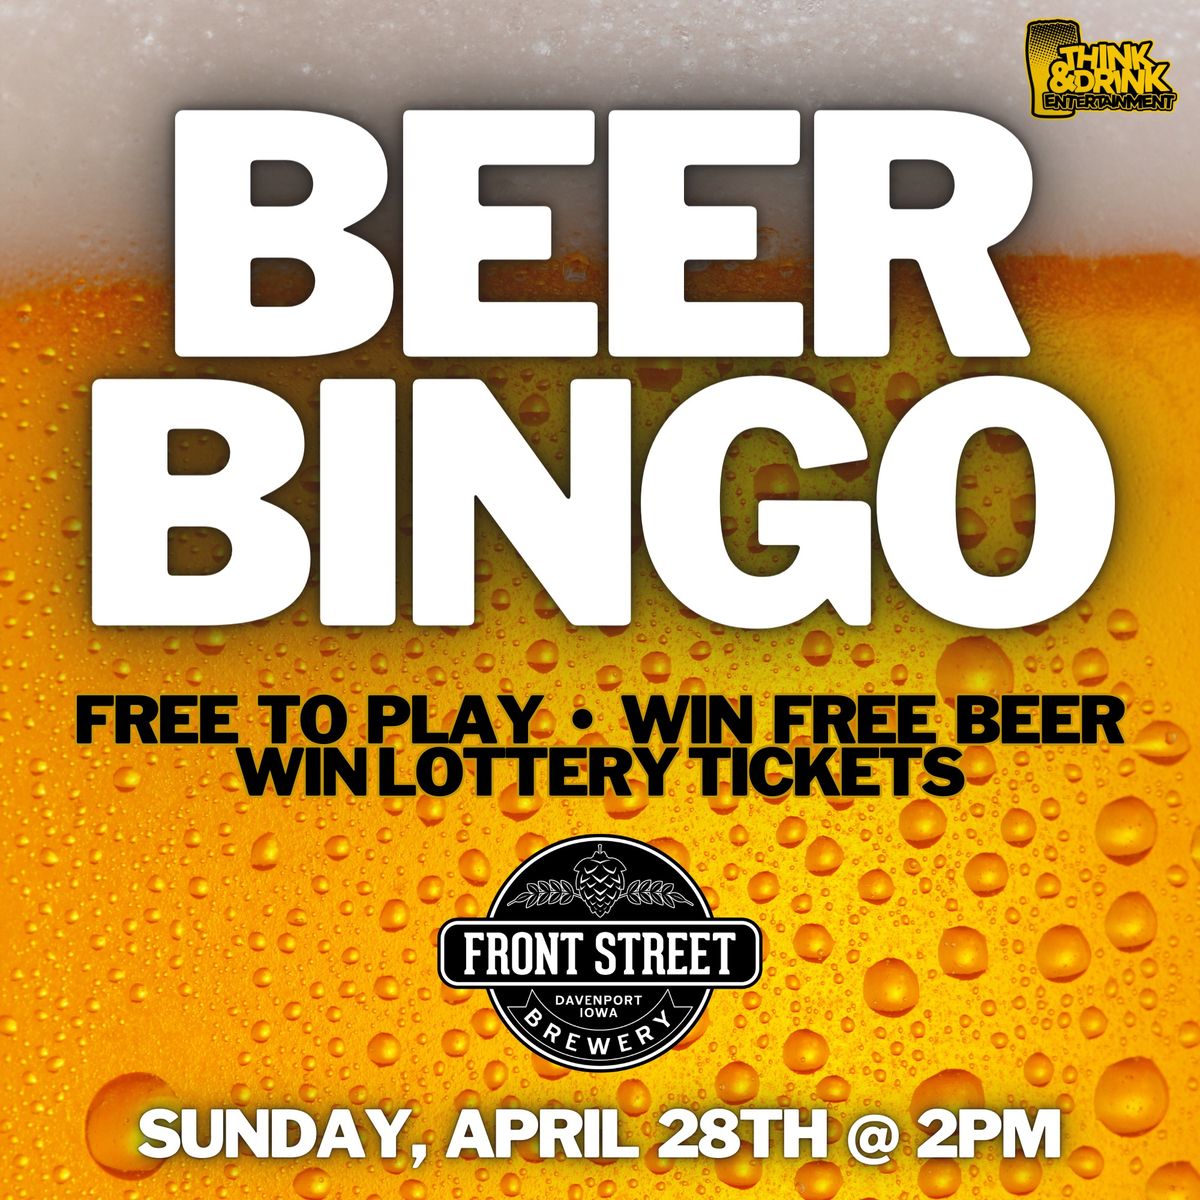 BEER BINGO @ Front Street Brewery & Taproom (Davenport, IA) \/ Sunday, April 28th @ 2pm